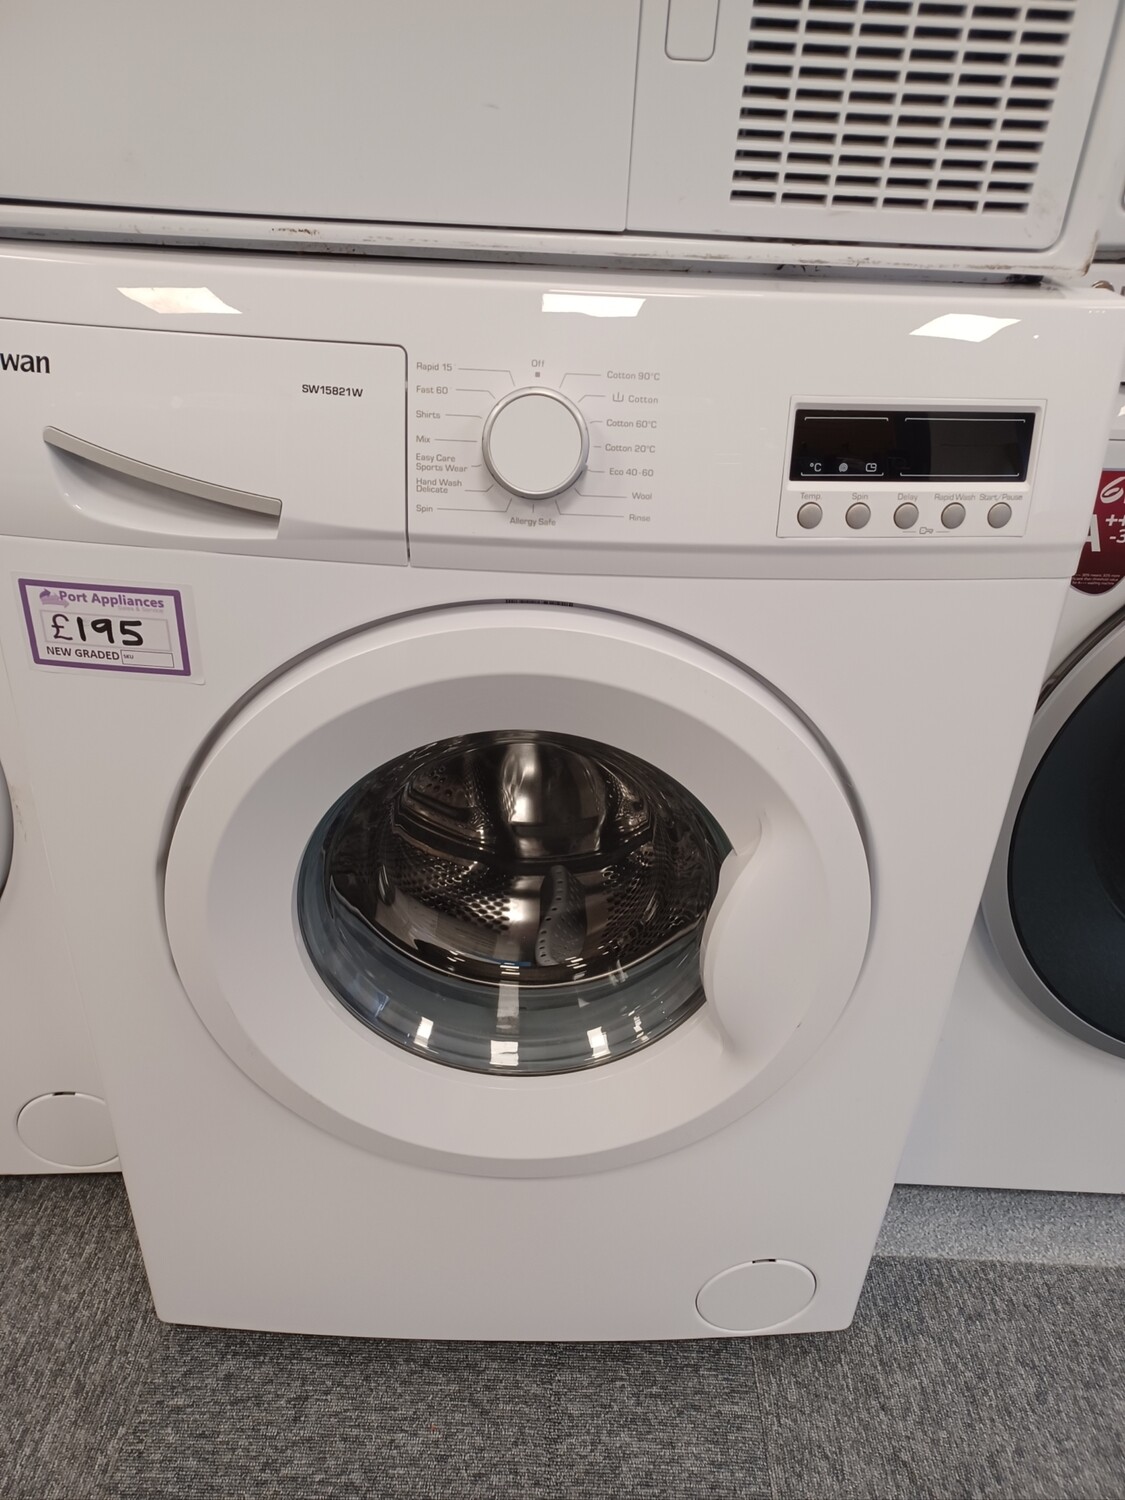 Swan SW15821W  7kg Load, 1200 Spin Washing Machine - White - New Graded + 1 Year Guarantee. Located In our Whitby Road Shop